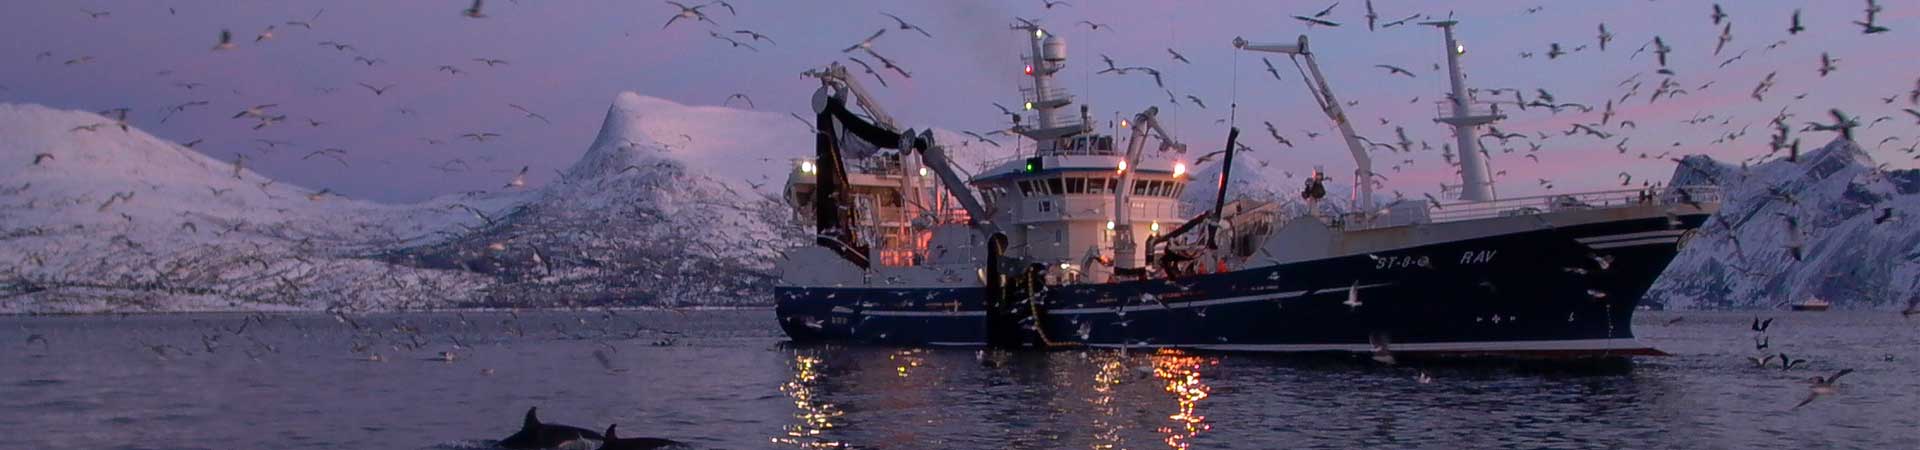 Fishing vessel in an Arctic fjord